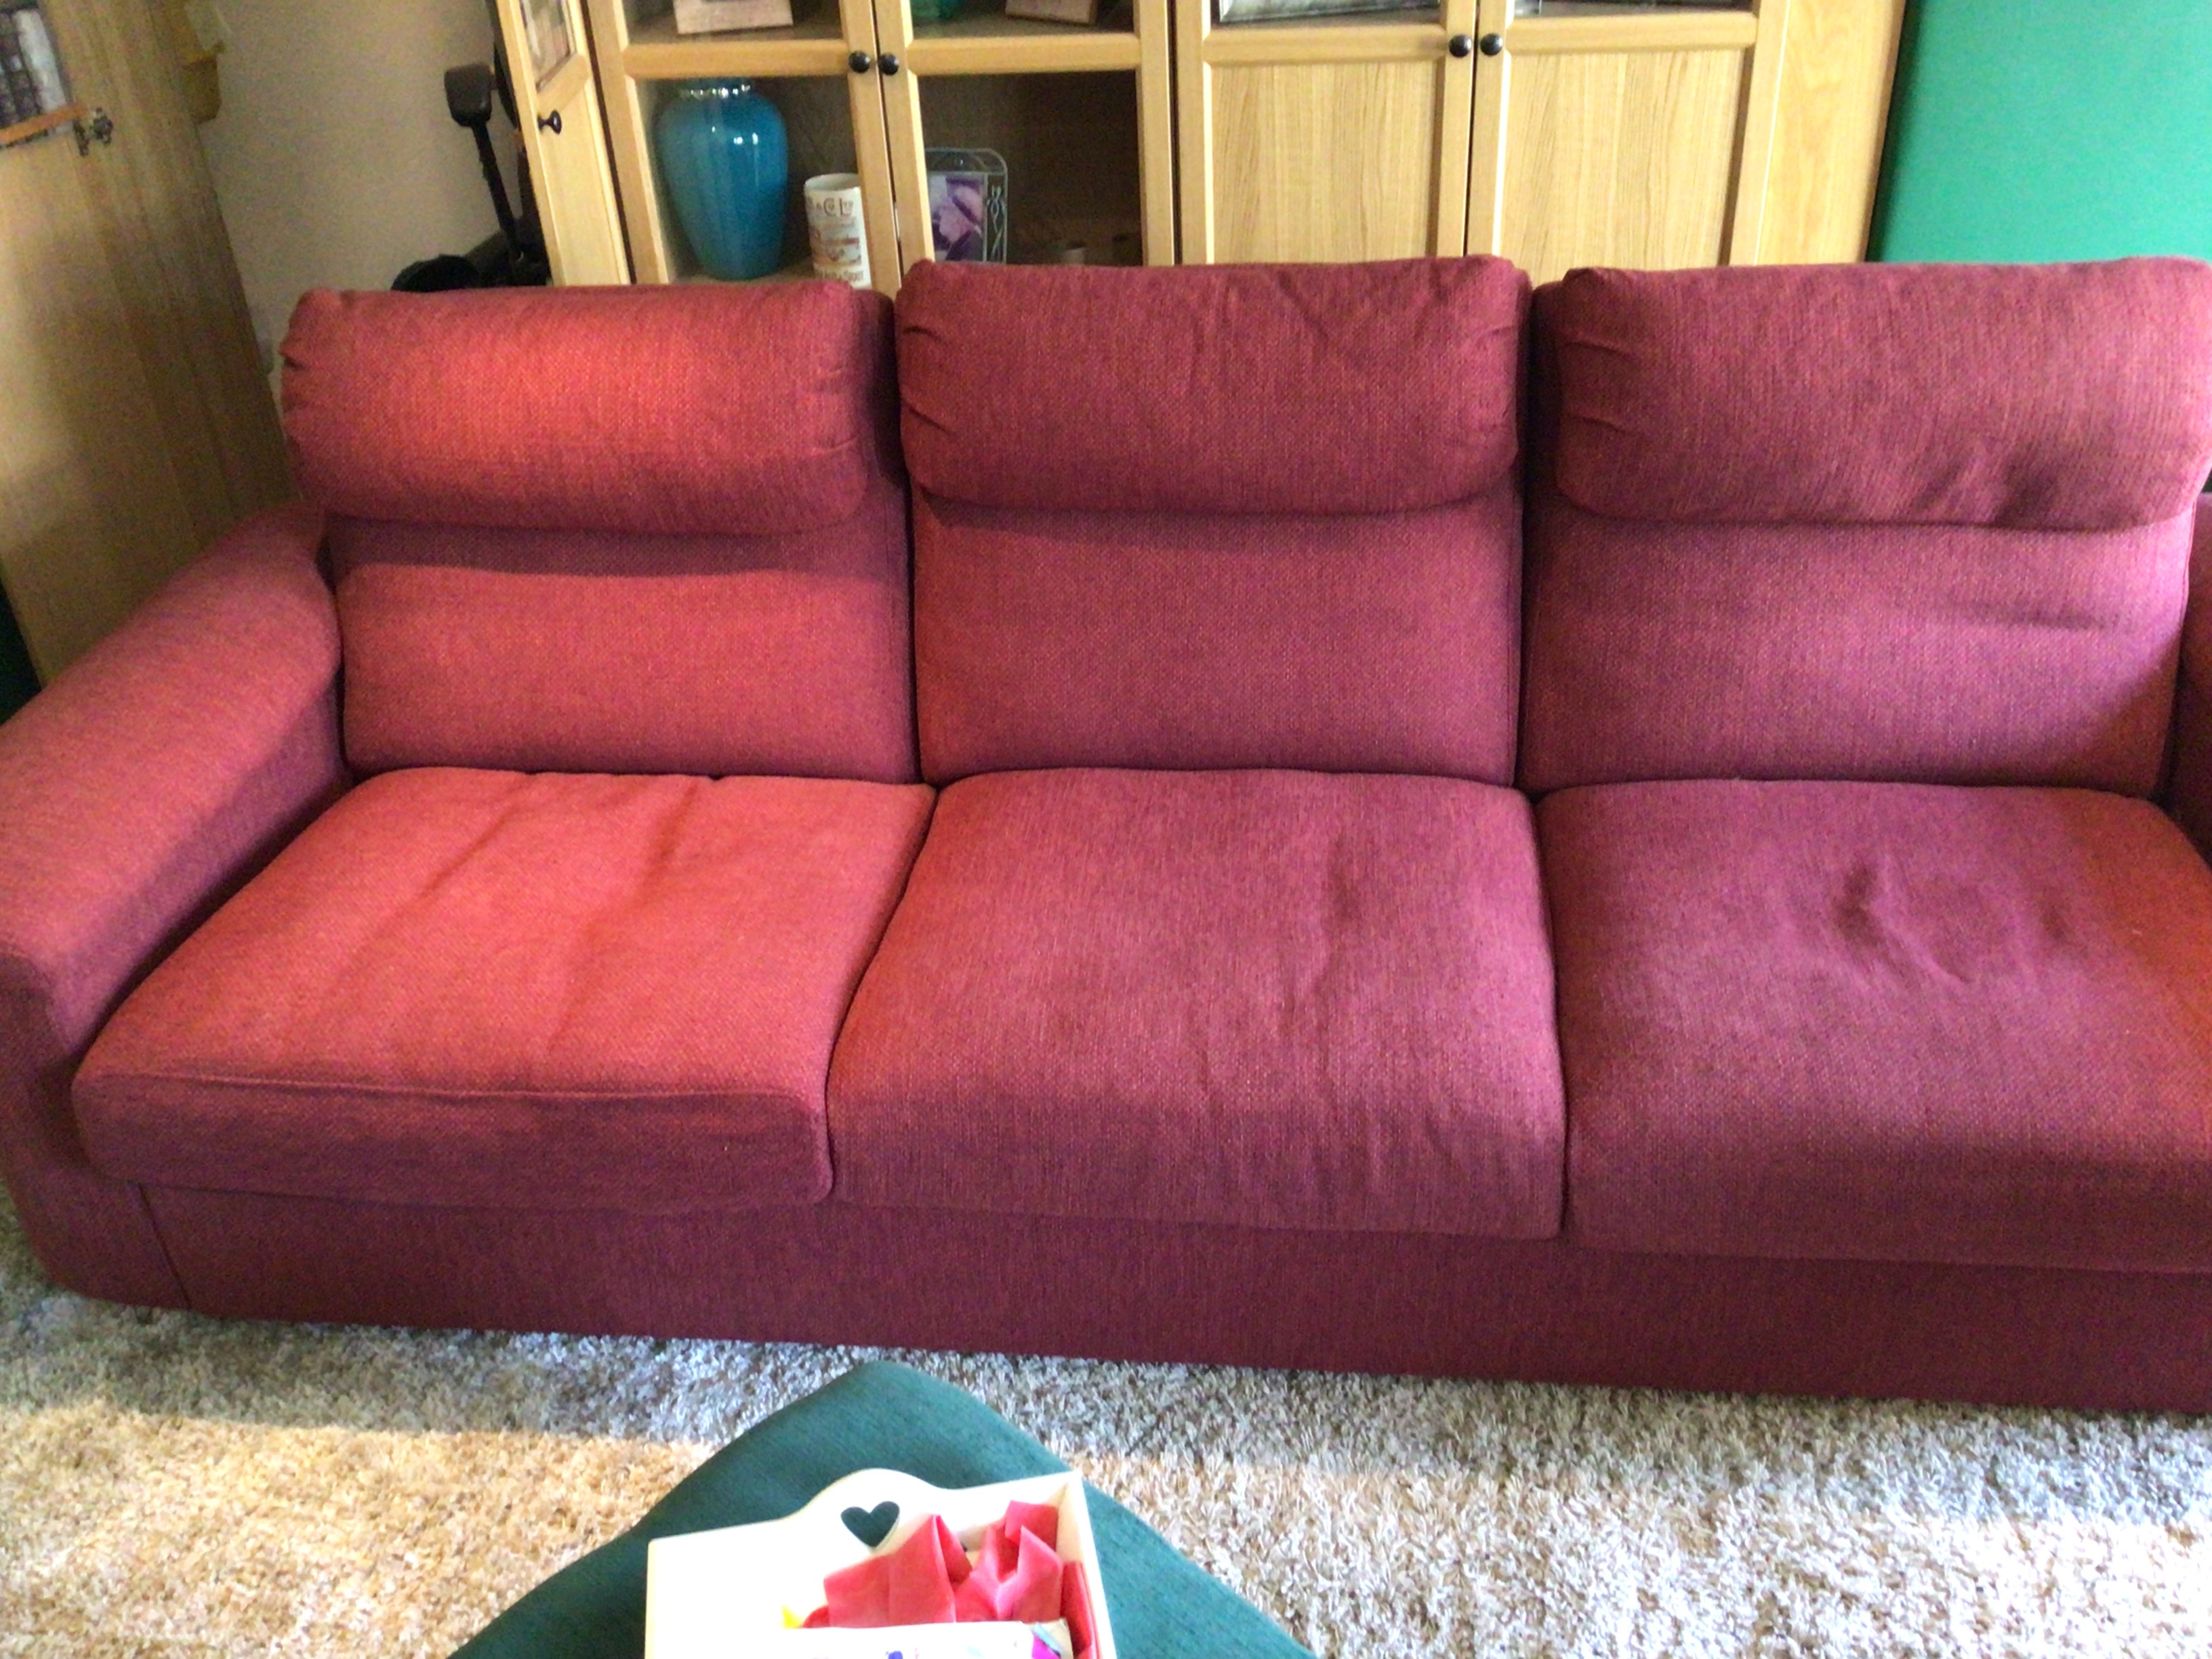 Three seater IKEA, Lidhult sofa with removable, washable covers in red.  Still stocked in store.
Less than 3 years old.